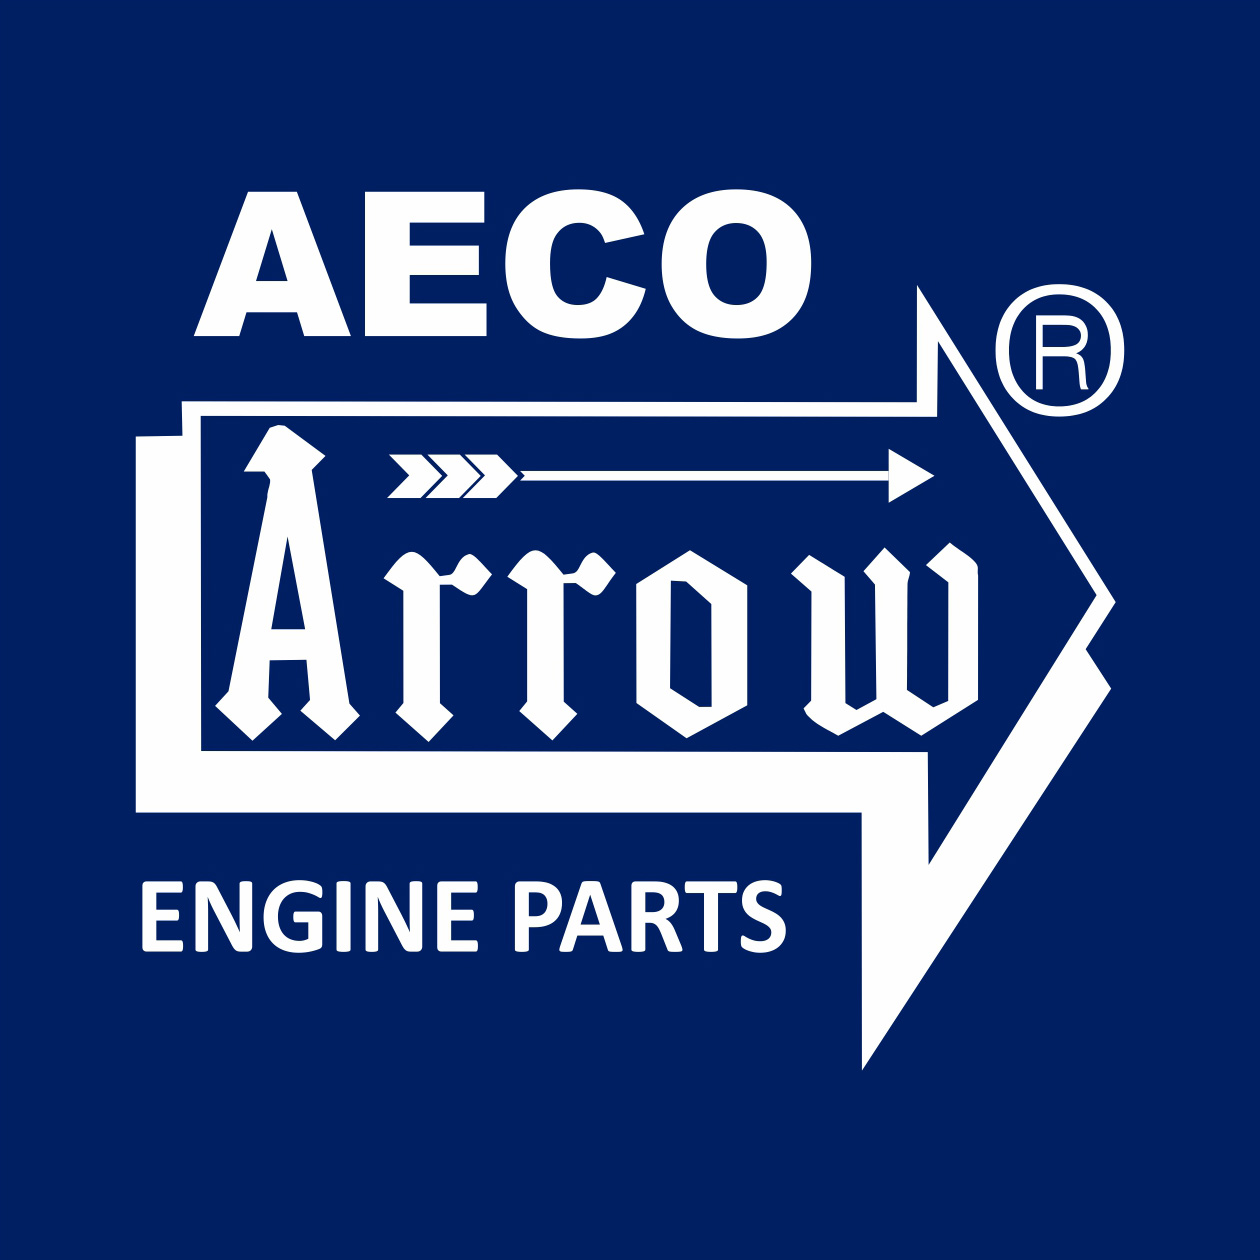 Engine Parts Manufacturer | (AECO Engineering Co)